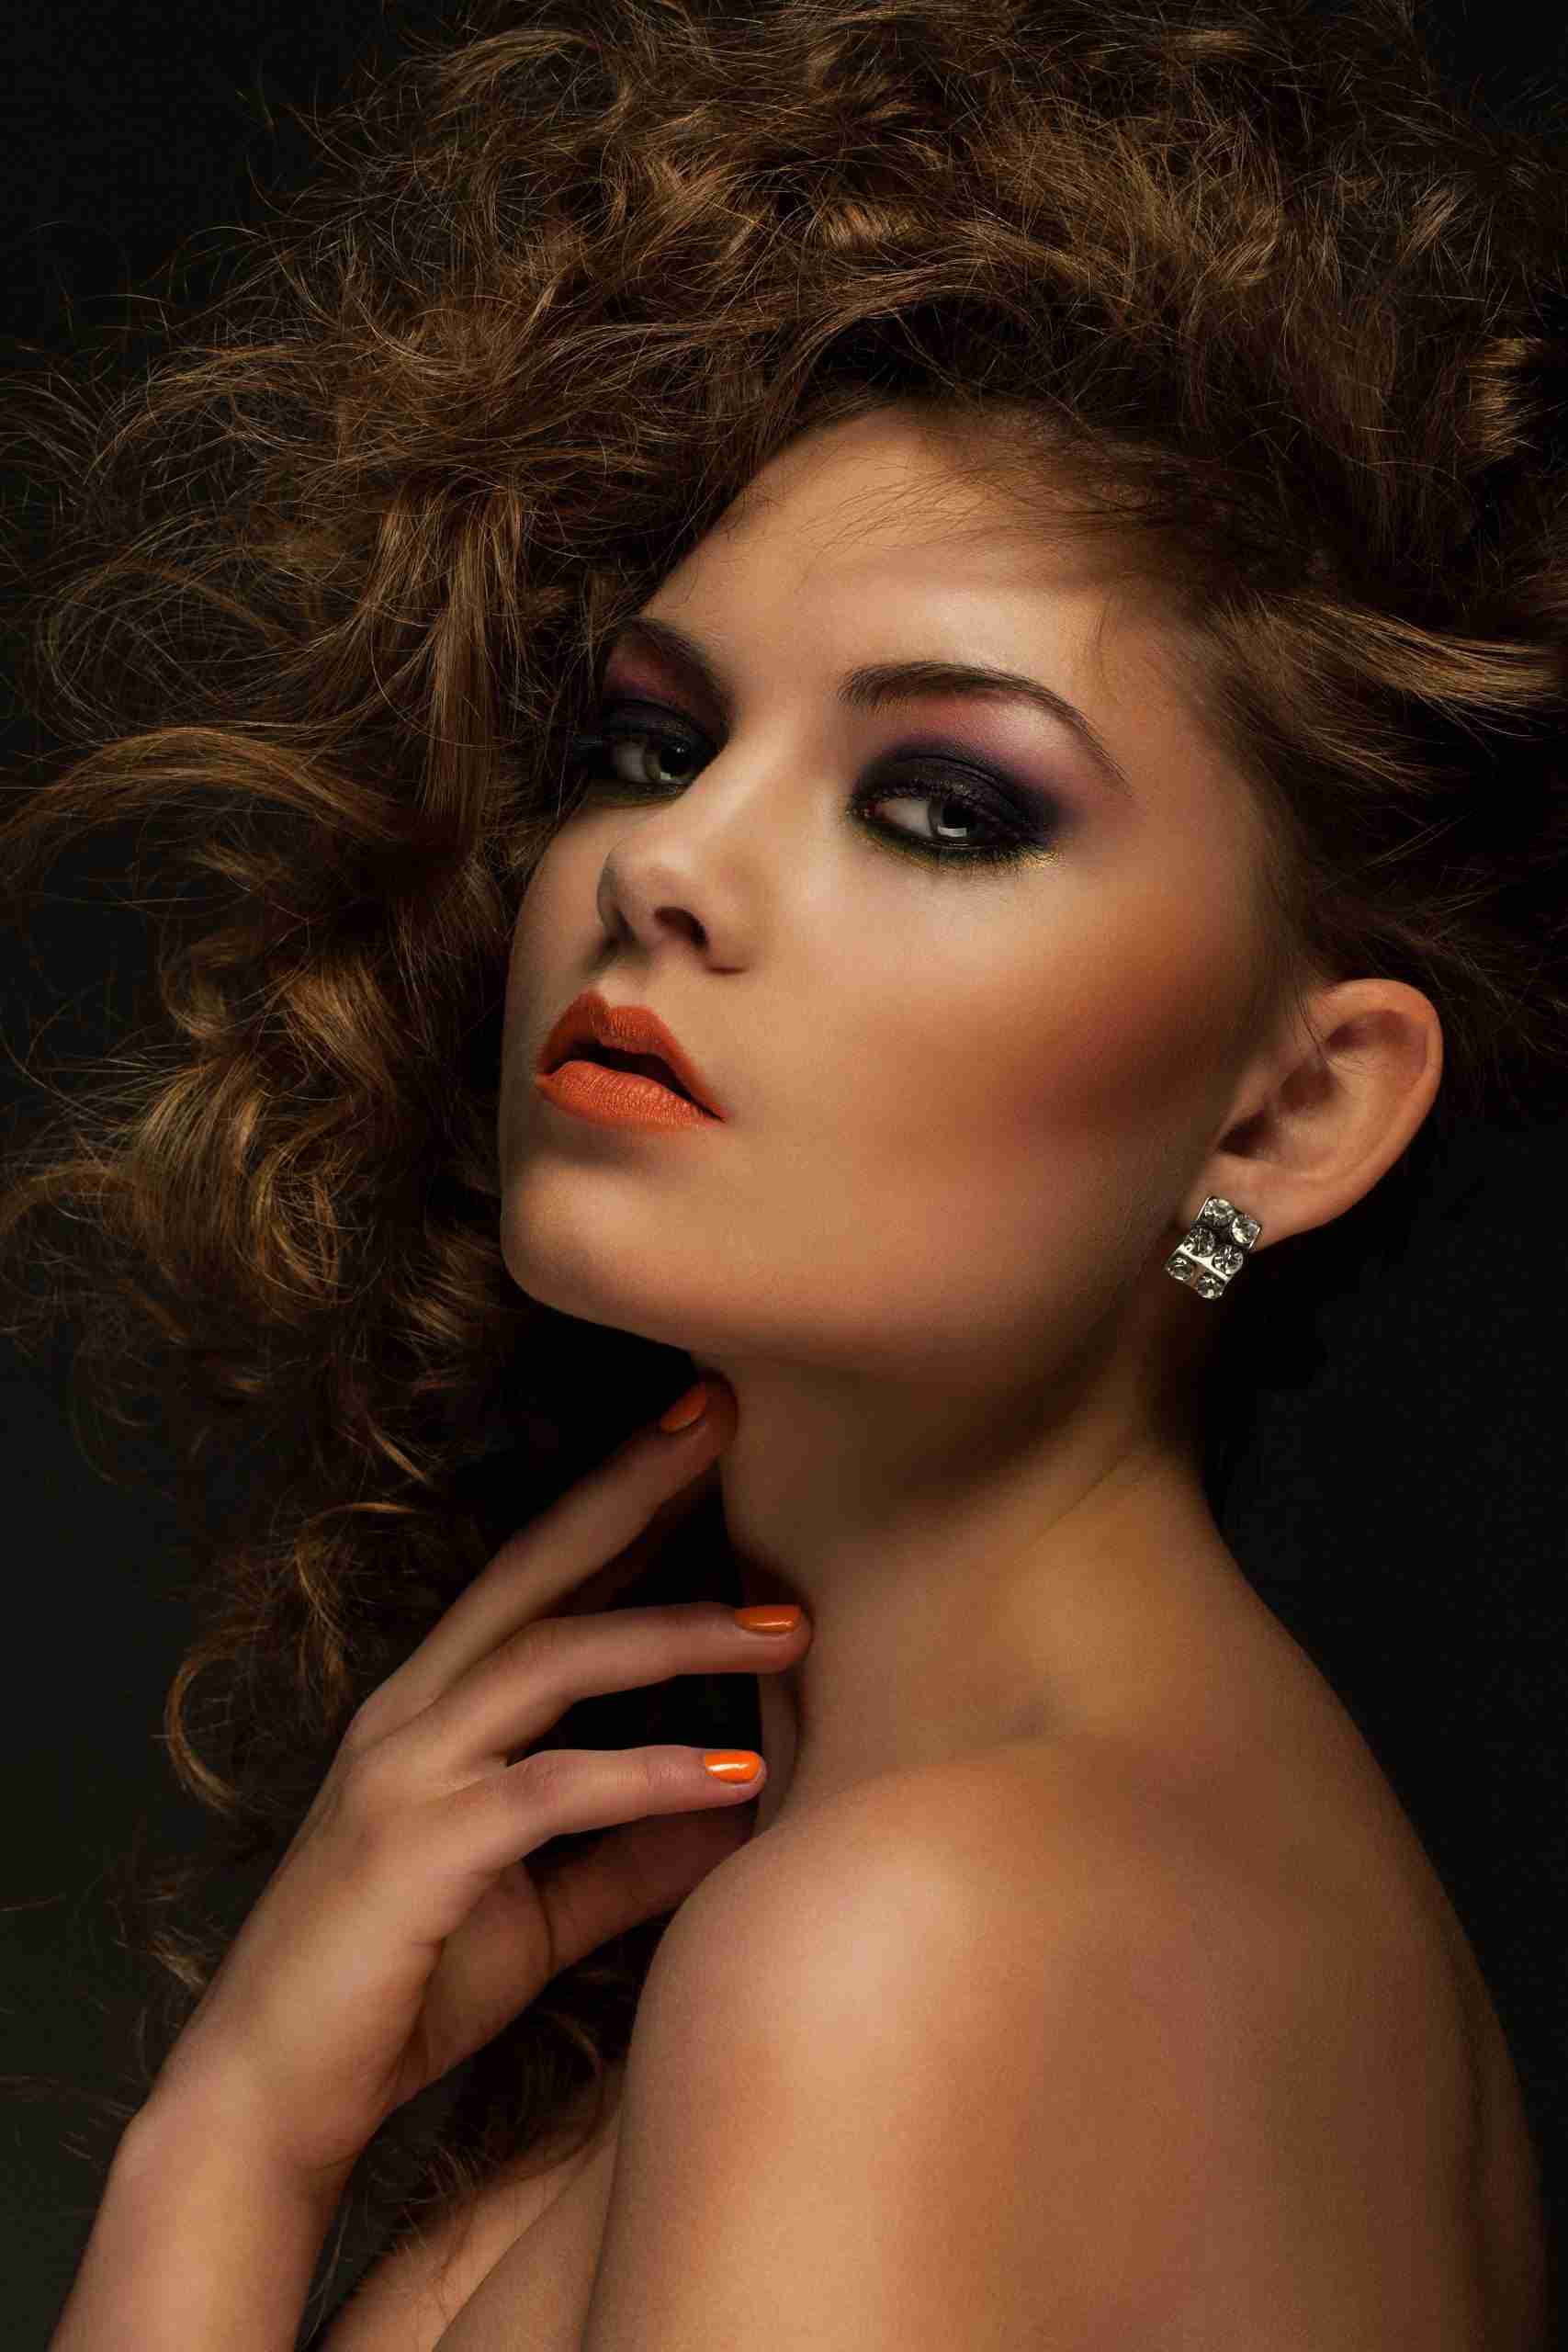 Beautiful woman with curls and makeup